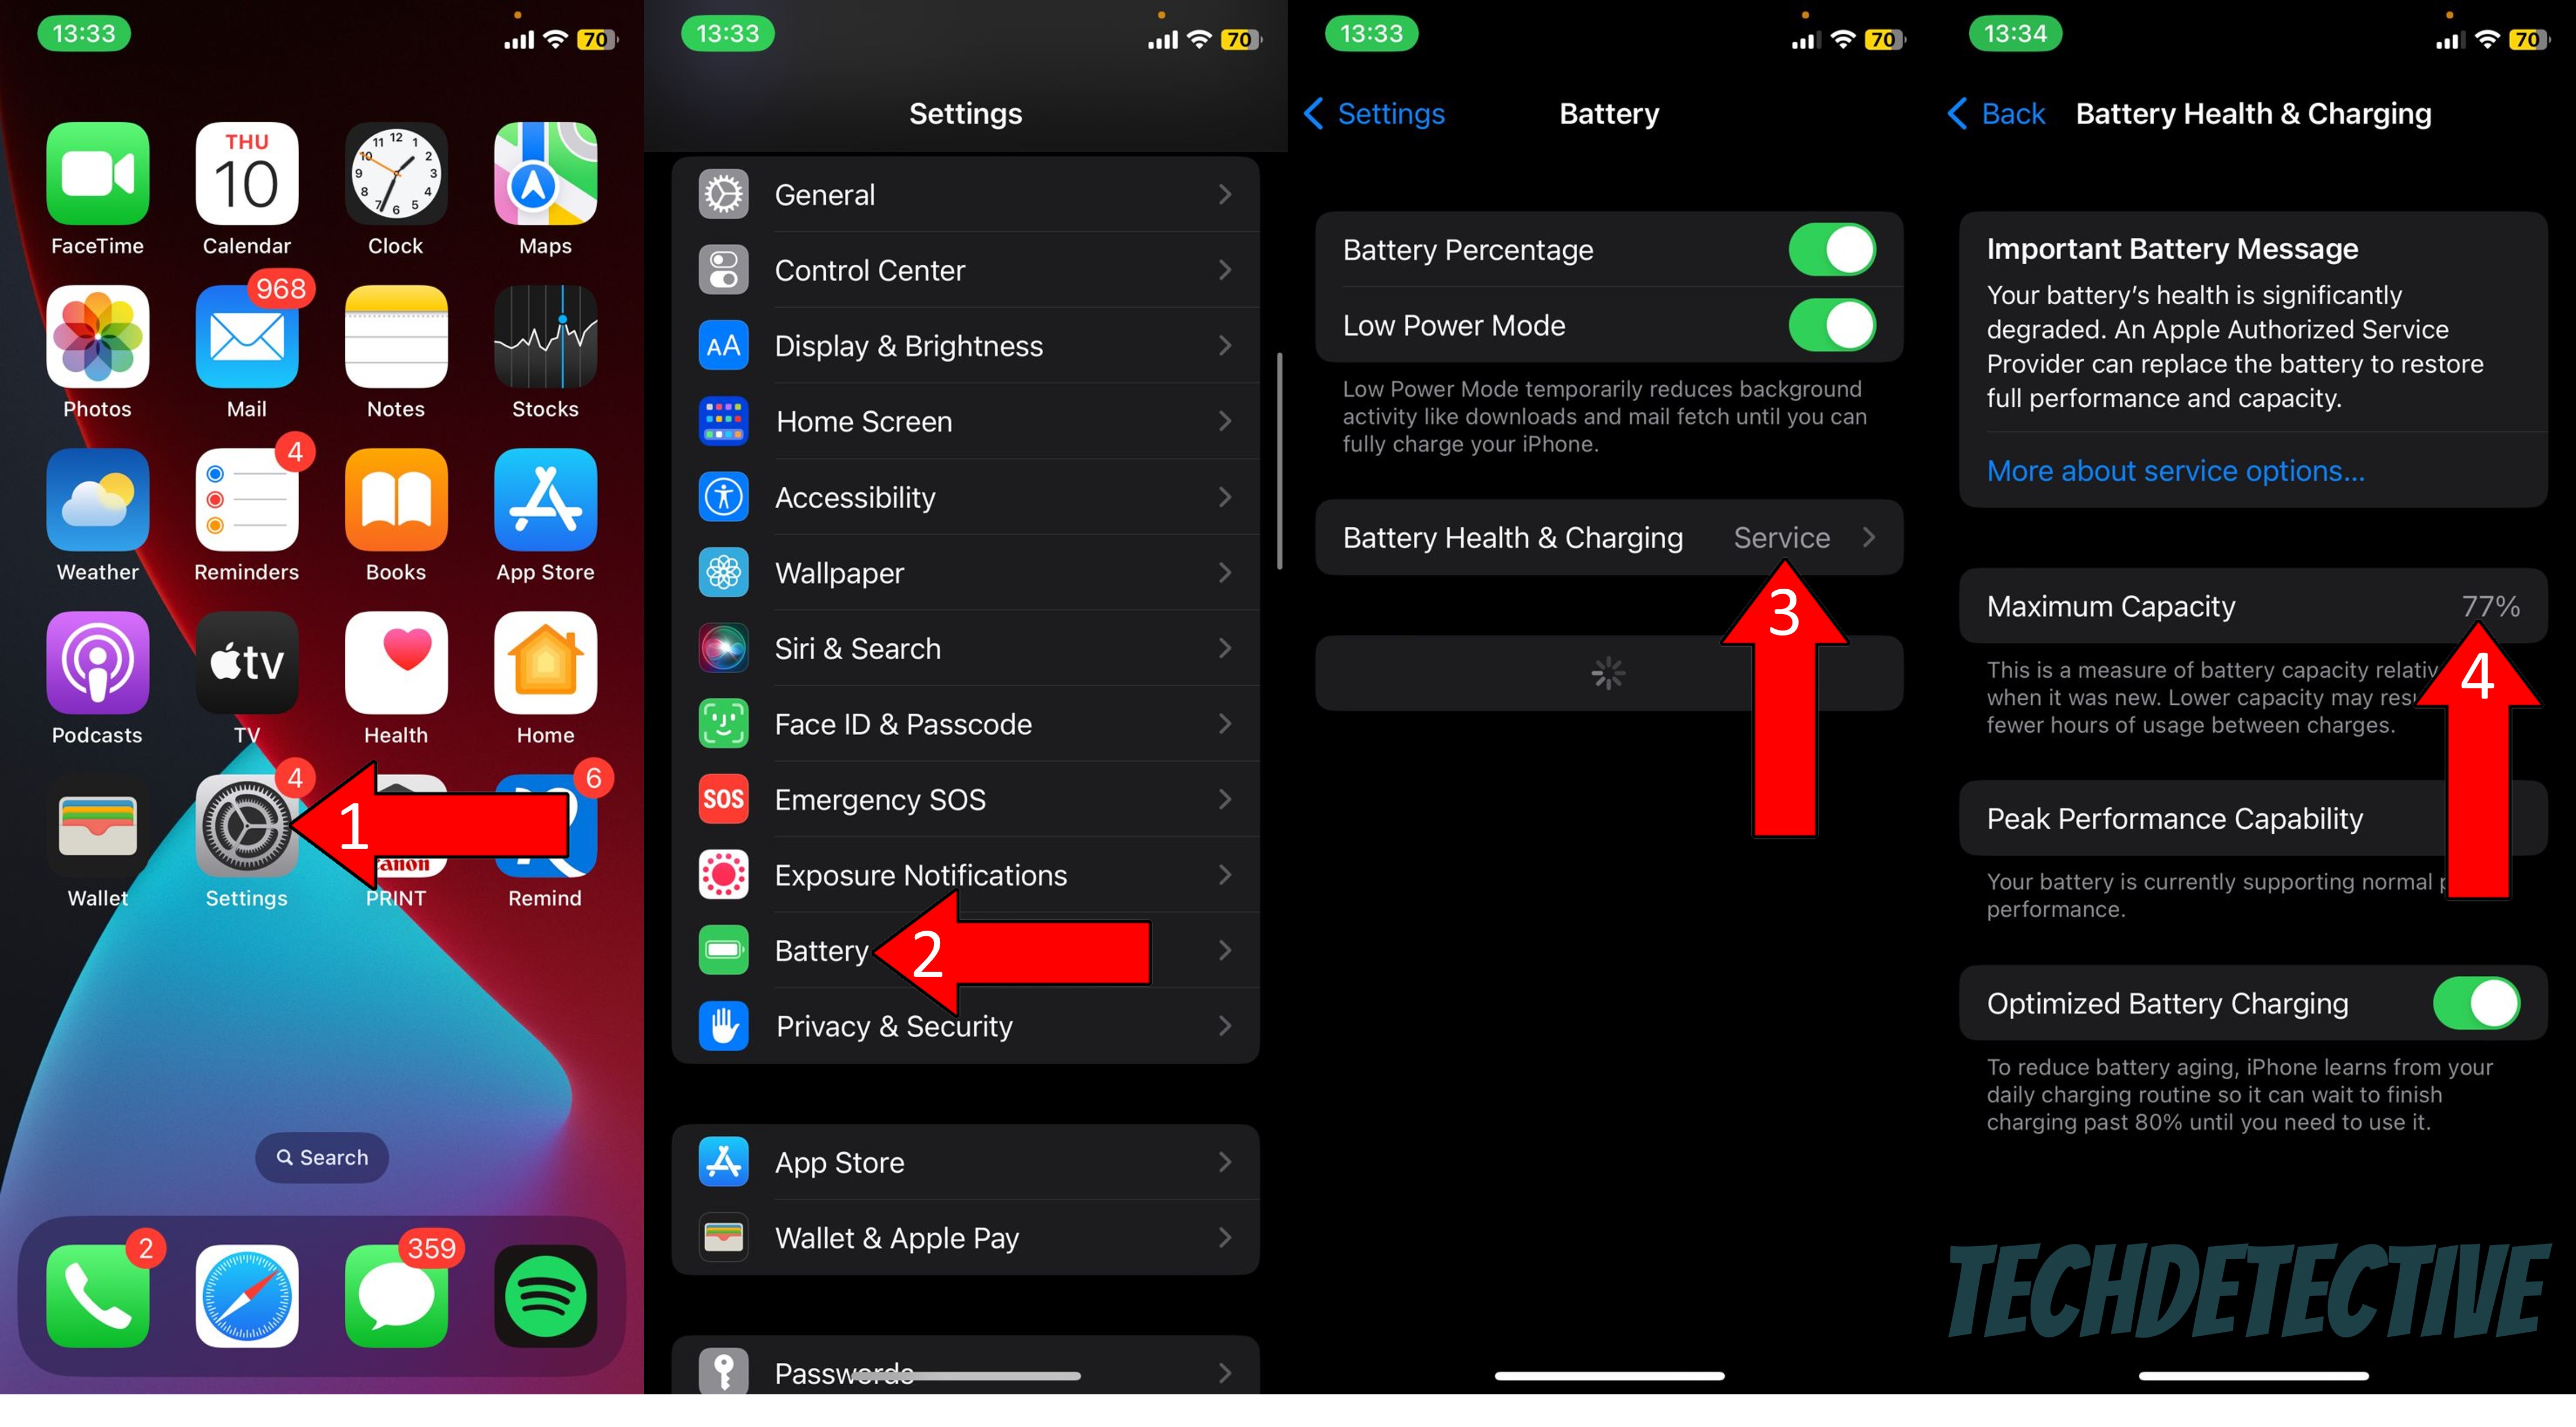 How to check battery health percentage on iOS